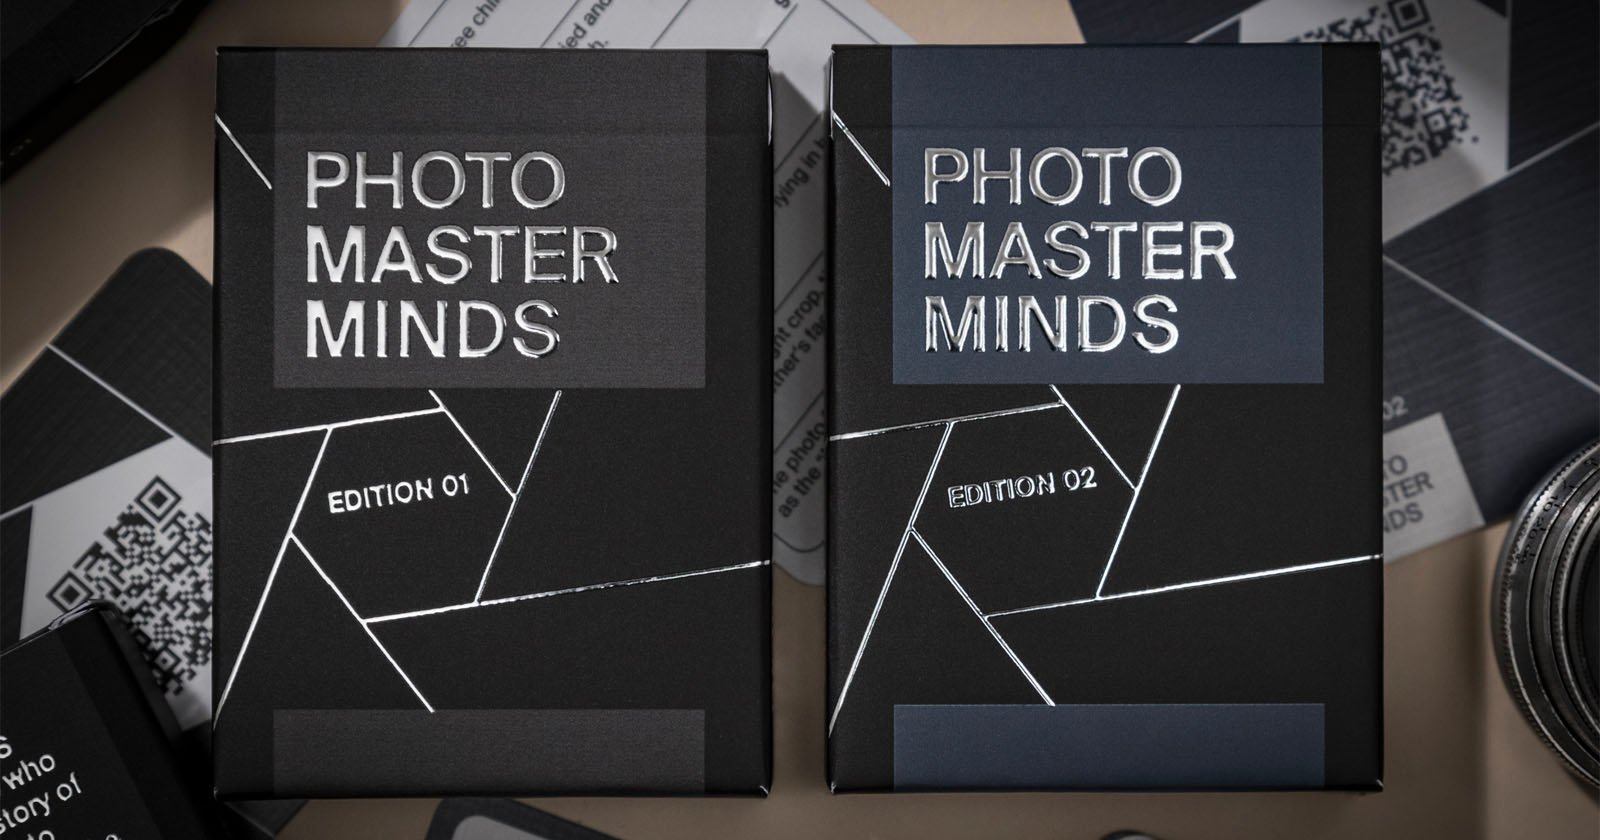 Test Your Photo Knowledge with Photo Master Minds Card Game